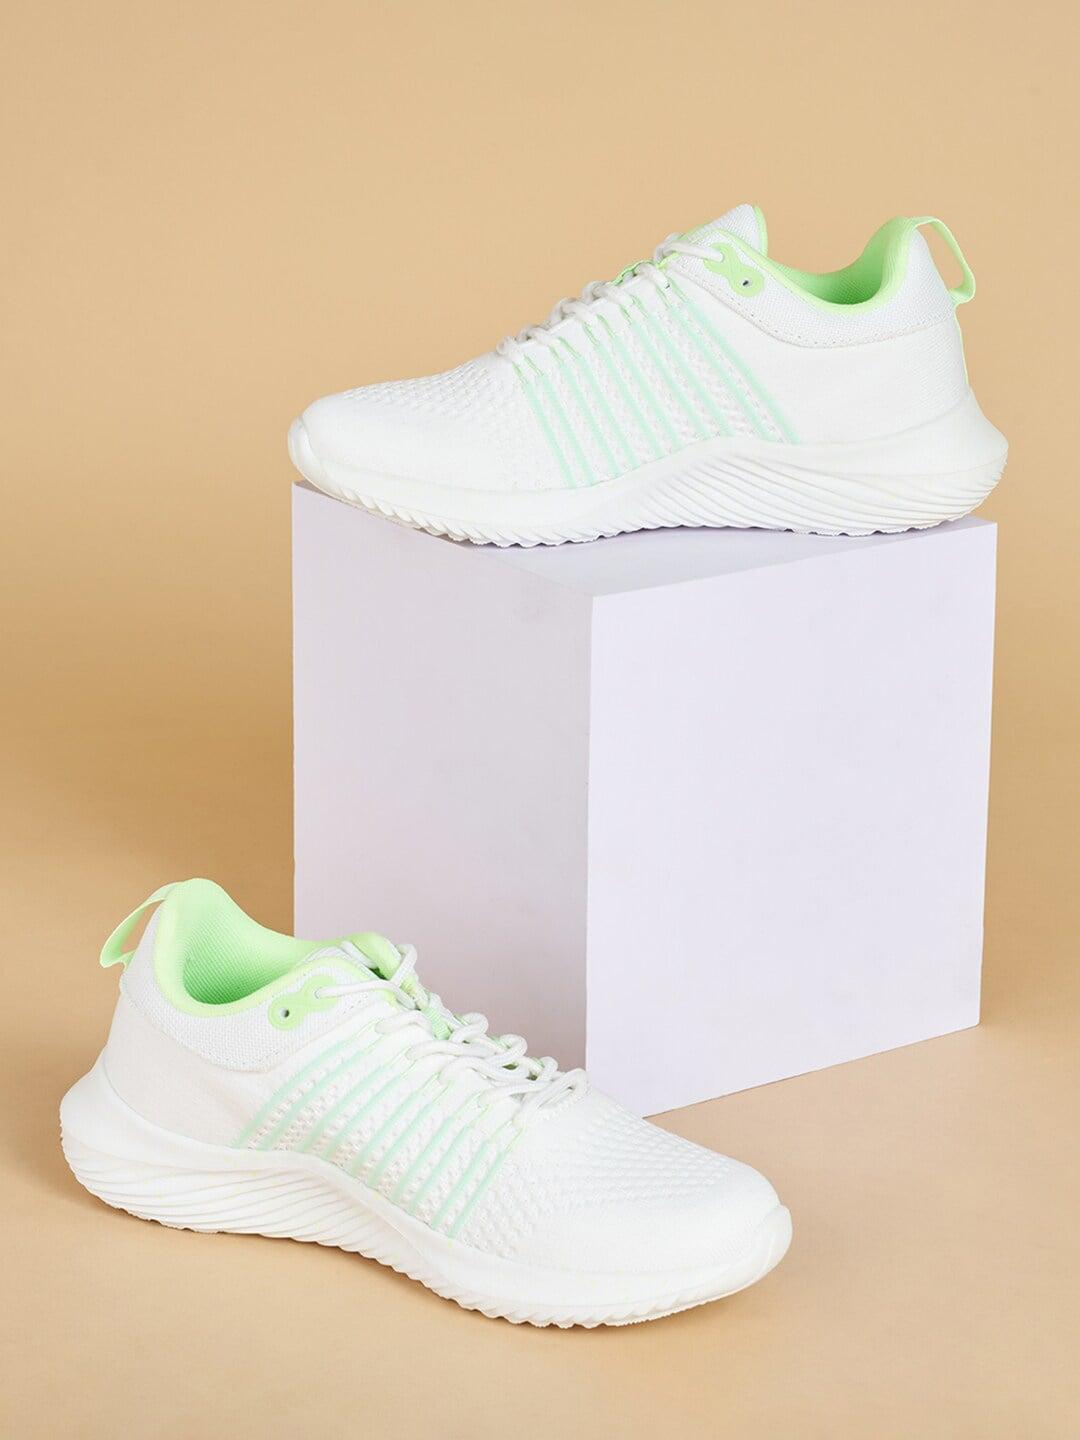 forever-glam-by-pantaloons-women-off-white-textile-running-shoes